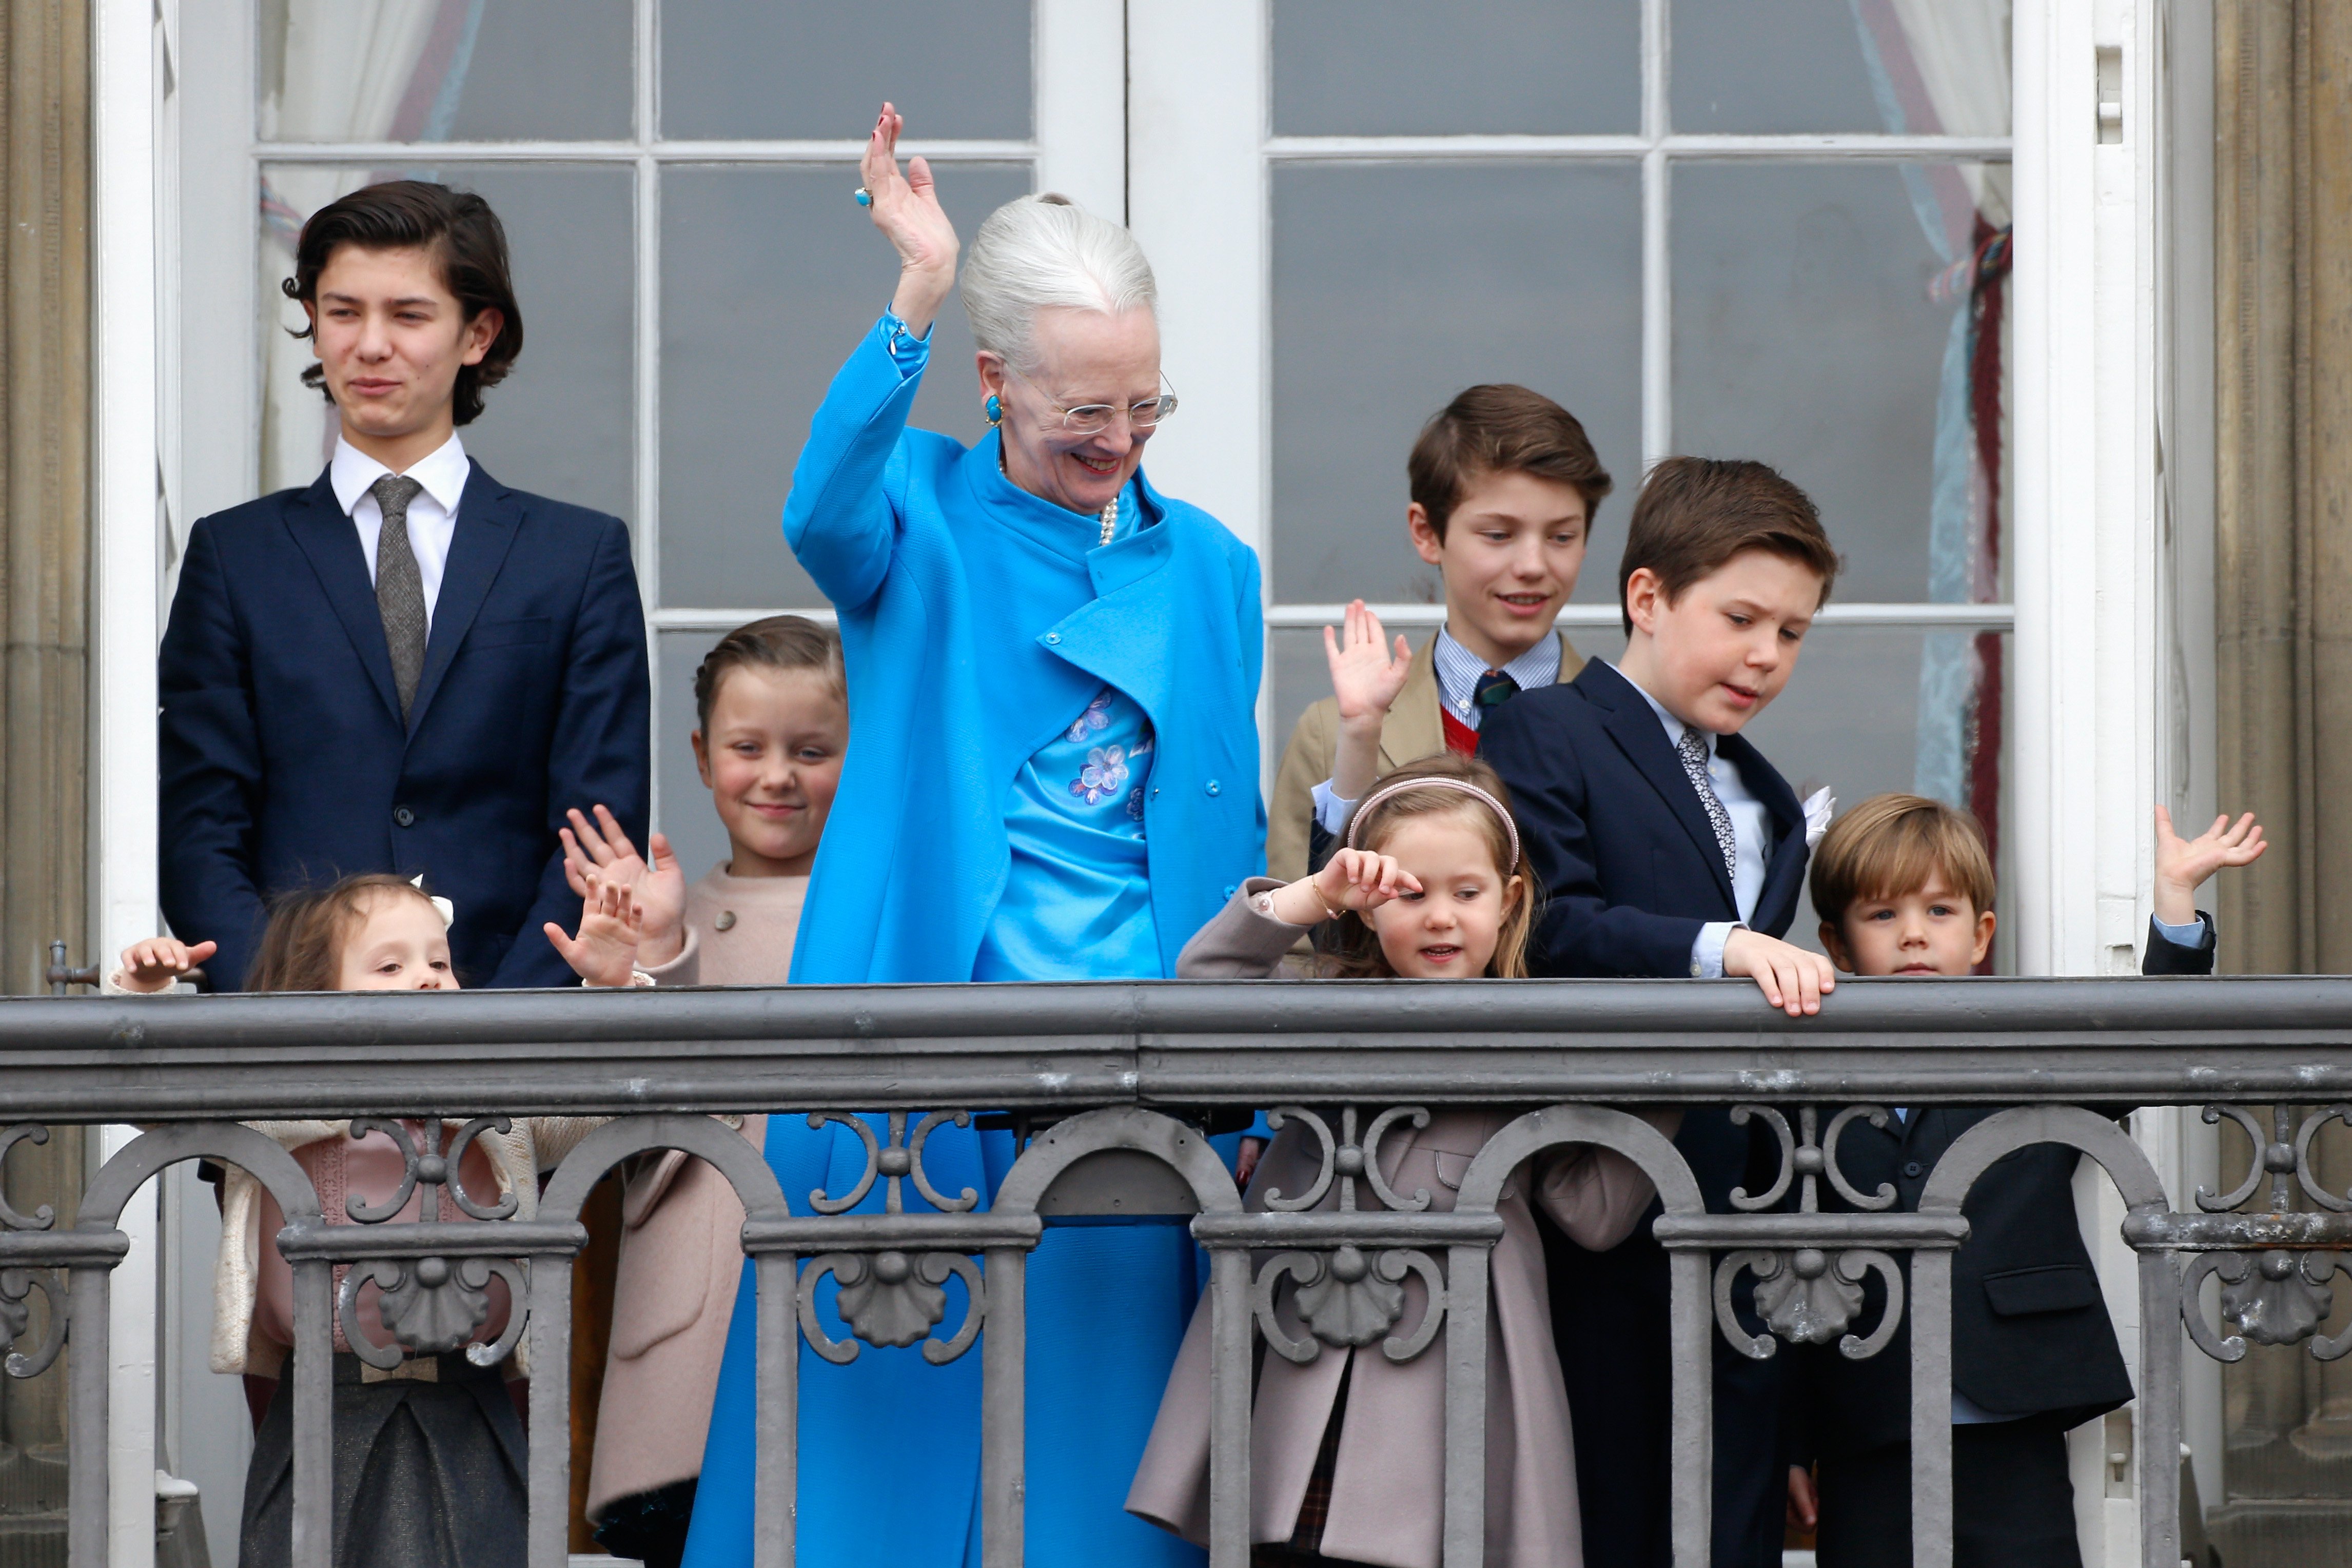 Queen Margrethe II of Denmark and her grandchildren Princess Josephine of Denmark, Princess Isabella of Denmark, Prince Vincent of Denmark, Prince Christian of Denmark, Prince Nikolai of Denmark, Prince Felix of Denmark, Princess Athena of Denmark, and Prince Henrik of Denmark attend the celebrations of her Majesty's 76th birthday at Amalienborg Royal Palace on April 16, 2016, in Copenhagen, Denmark. | Source: Getty Images